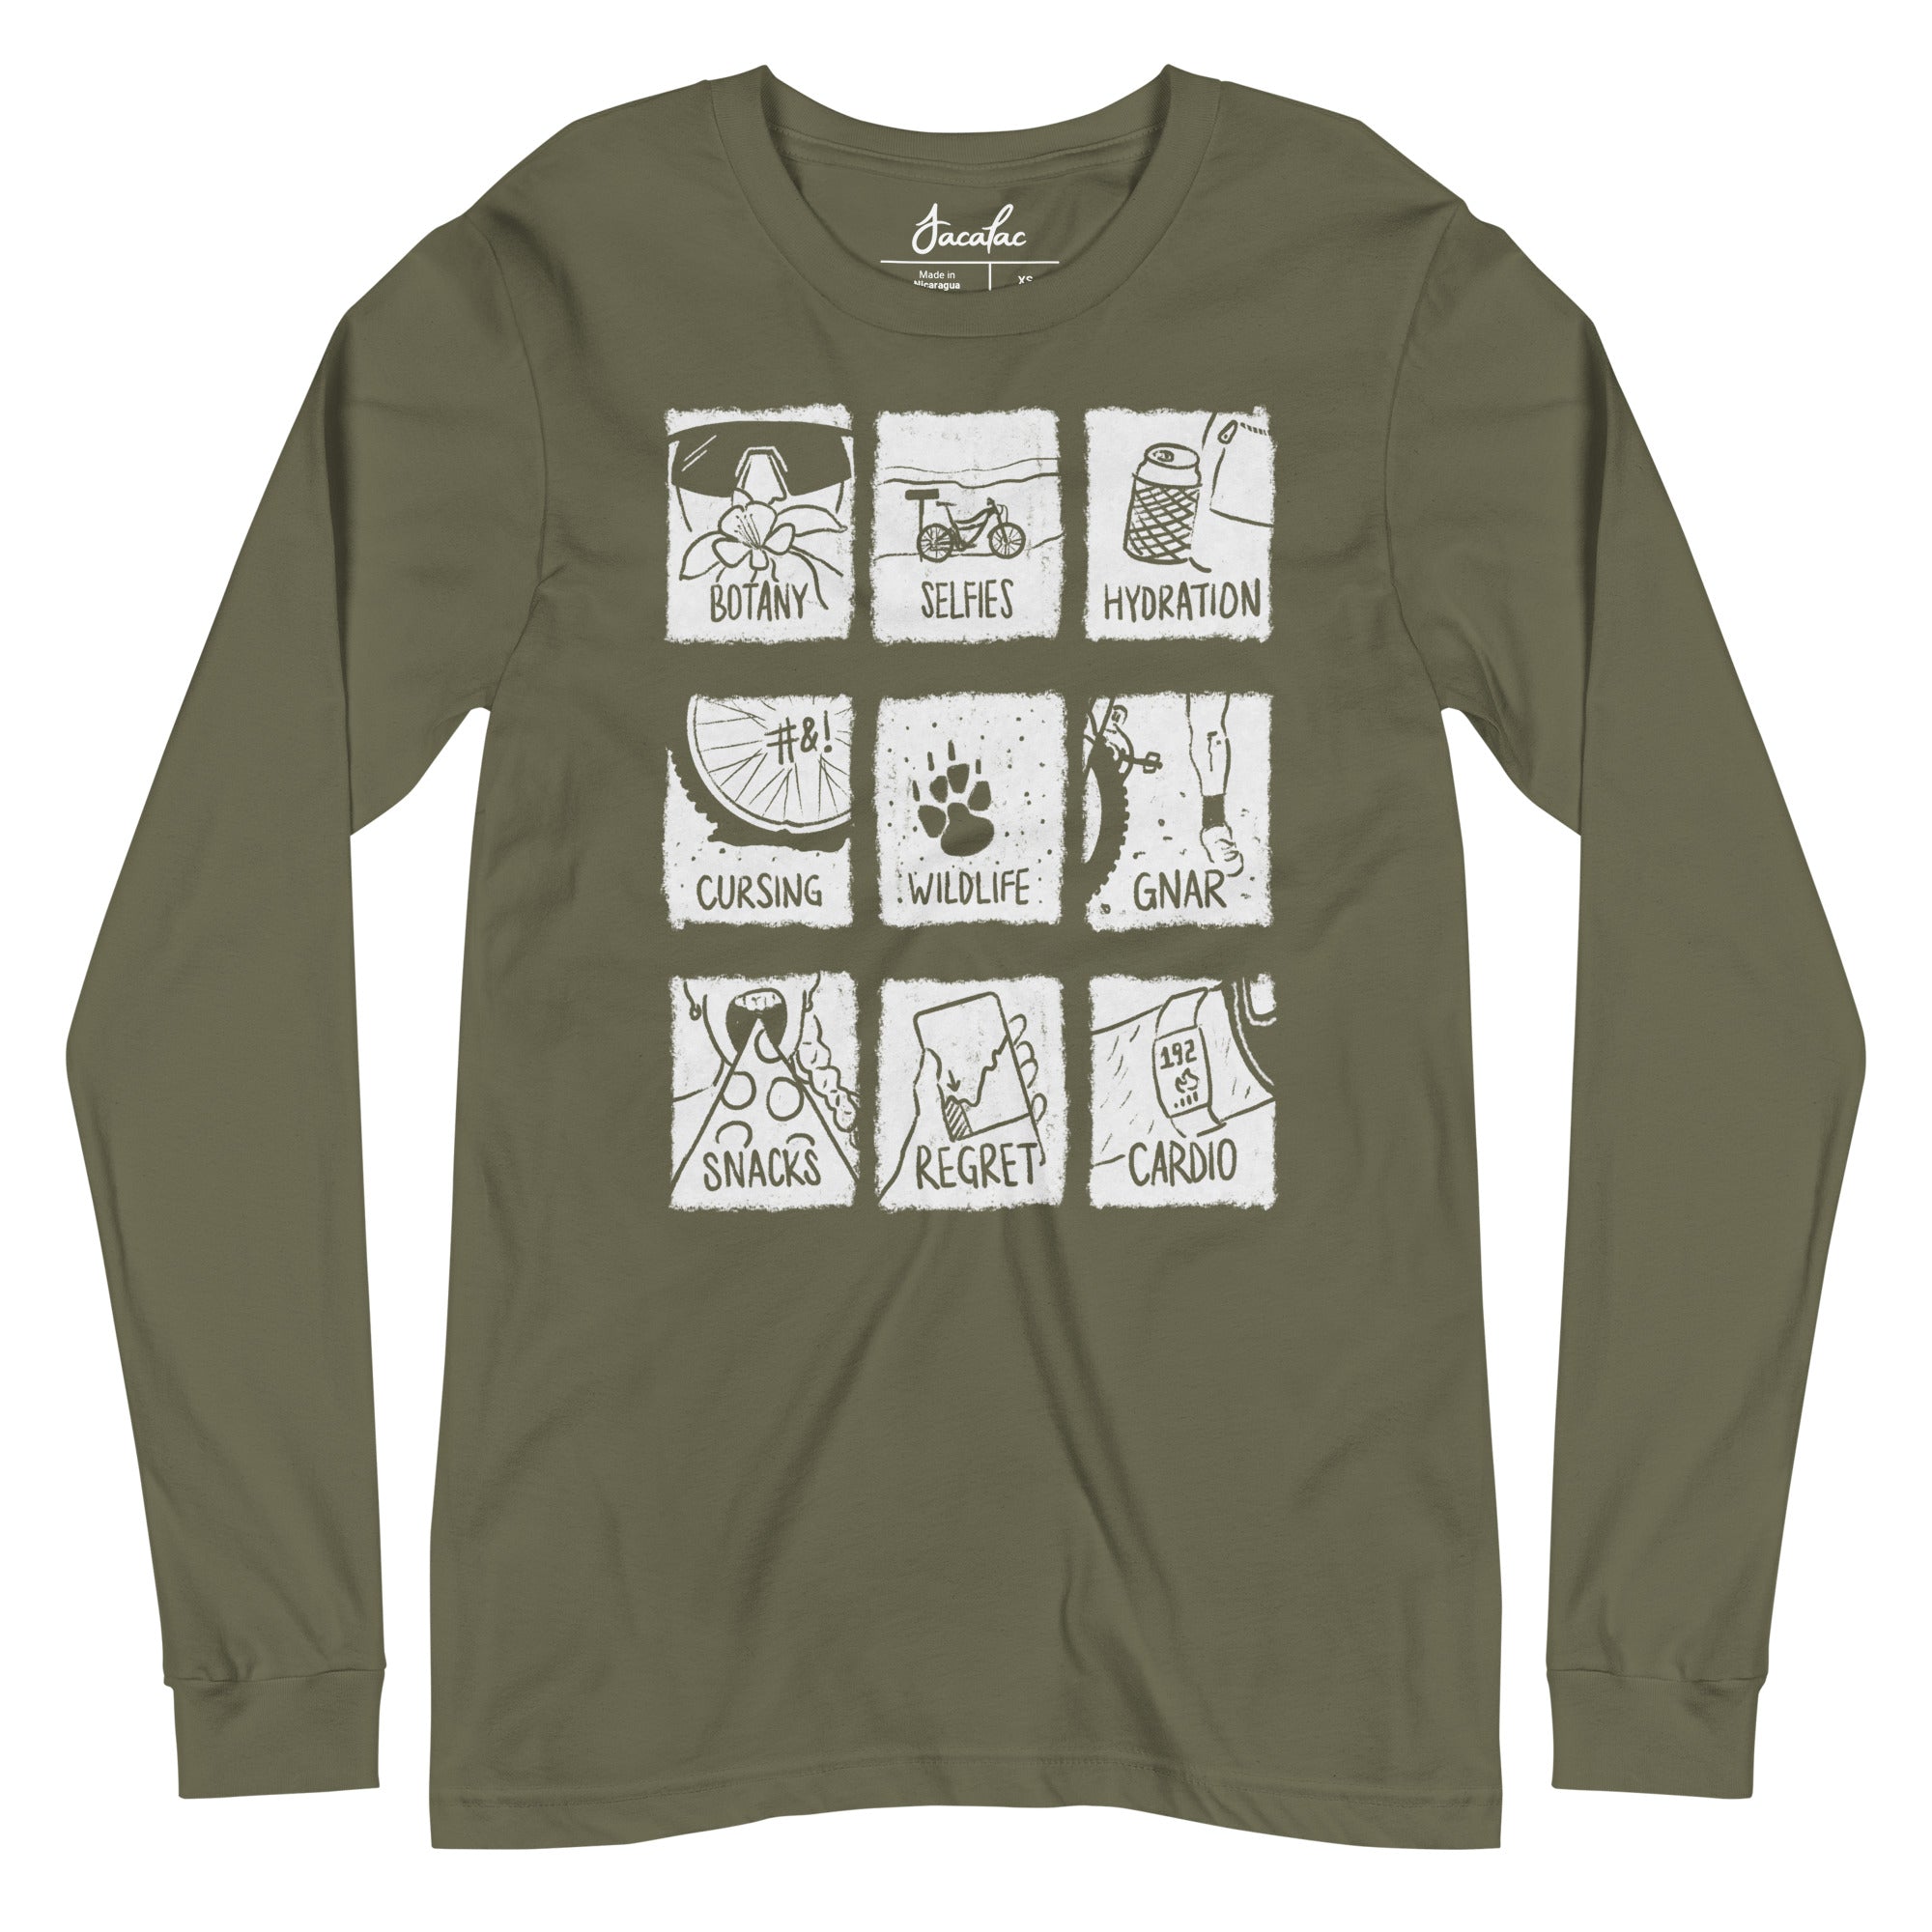 MTB Highs (and Lows) Long Sleeve T-shirt